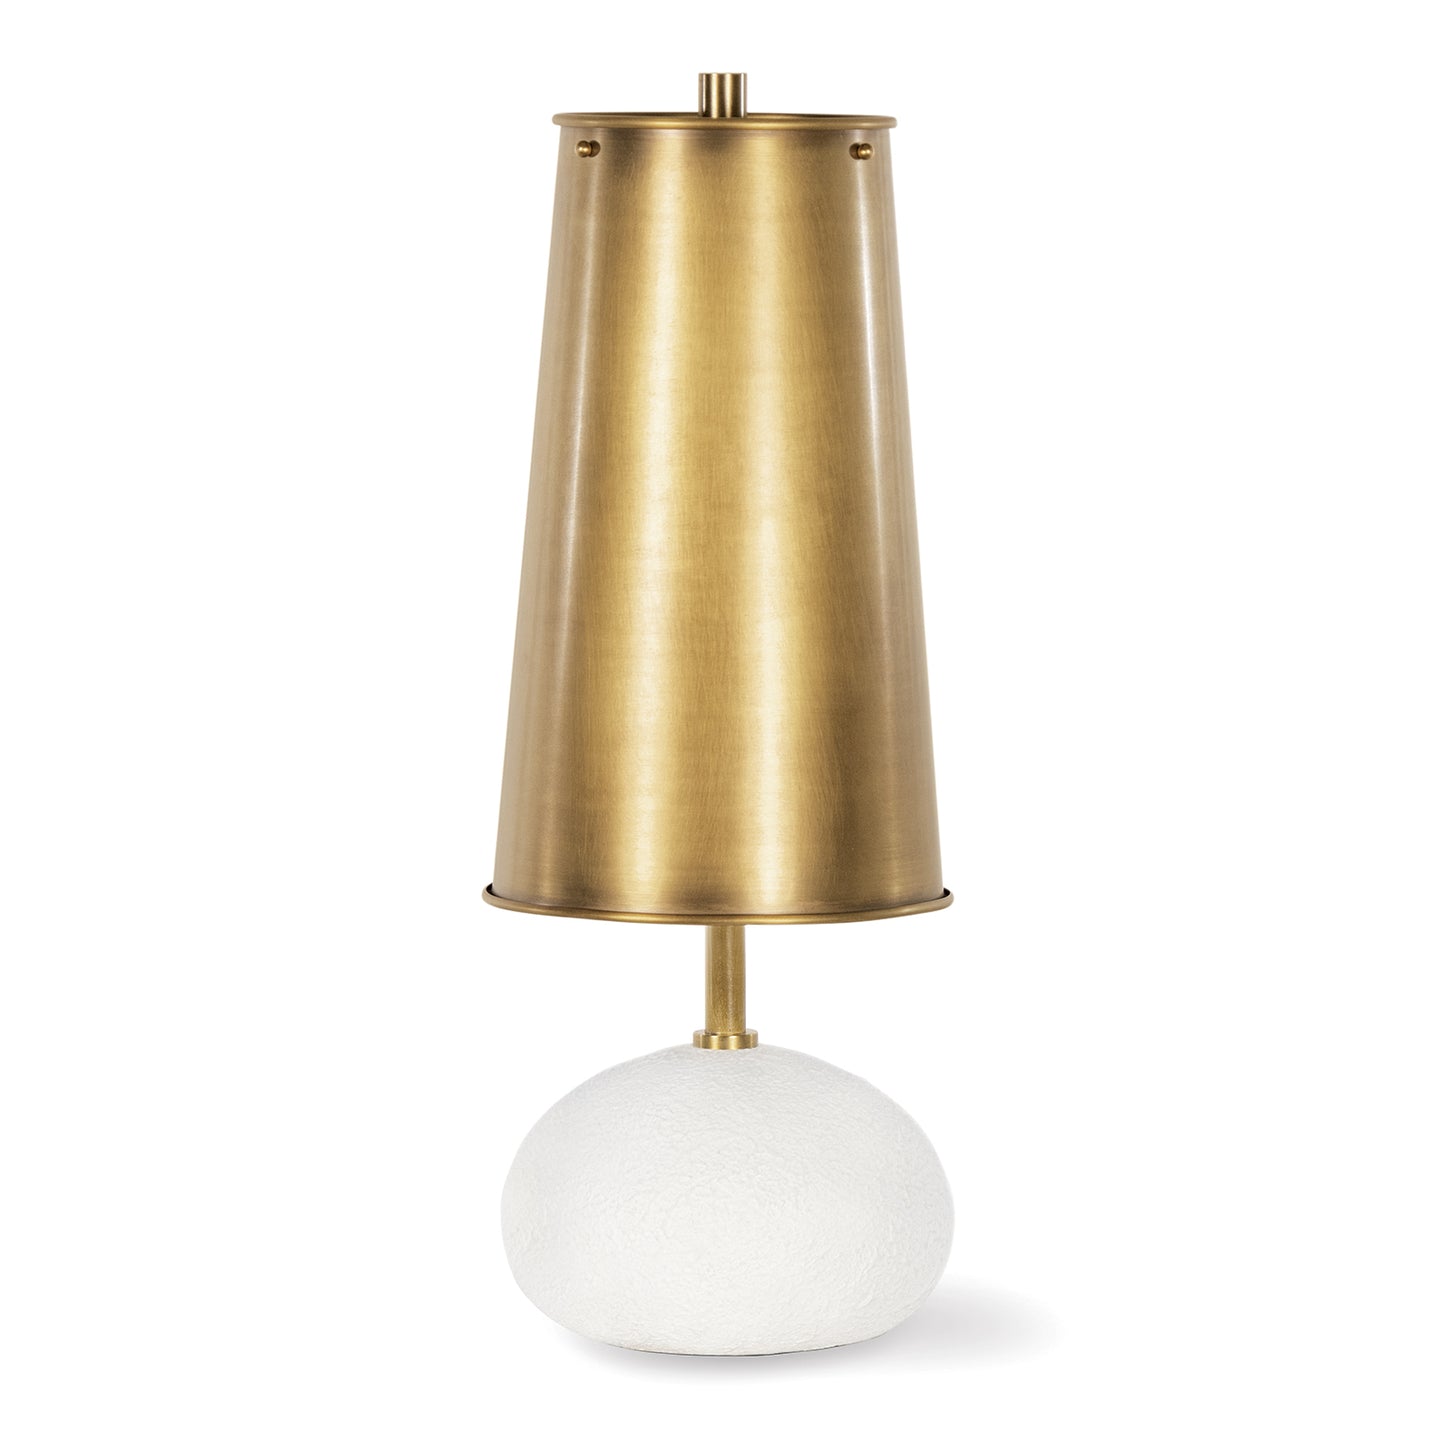 Hattie Concrete Mini Lamp in Natural Brass by Southern Living